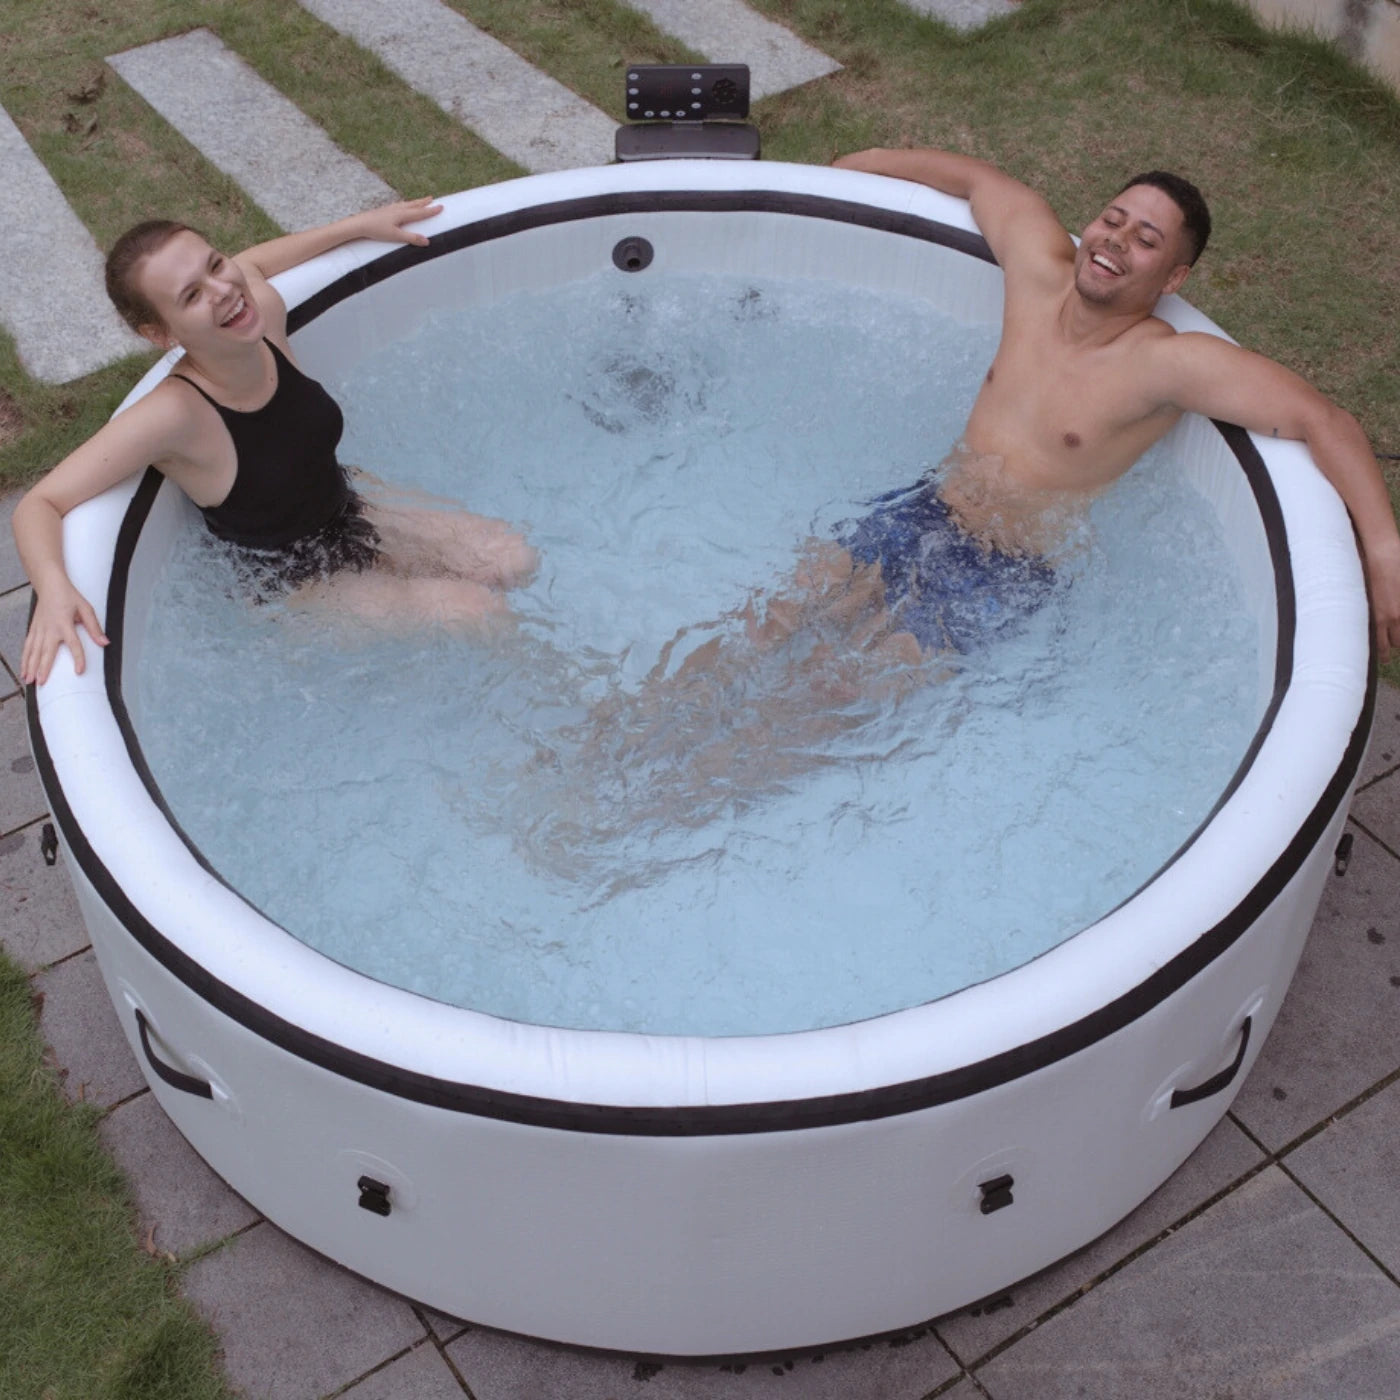 Halrove inflatable ice bath tub in backyard for ultimate outdoor relaxation and rejuvenation. 